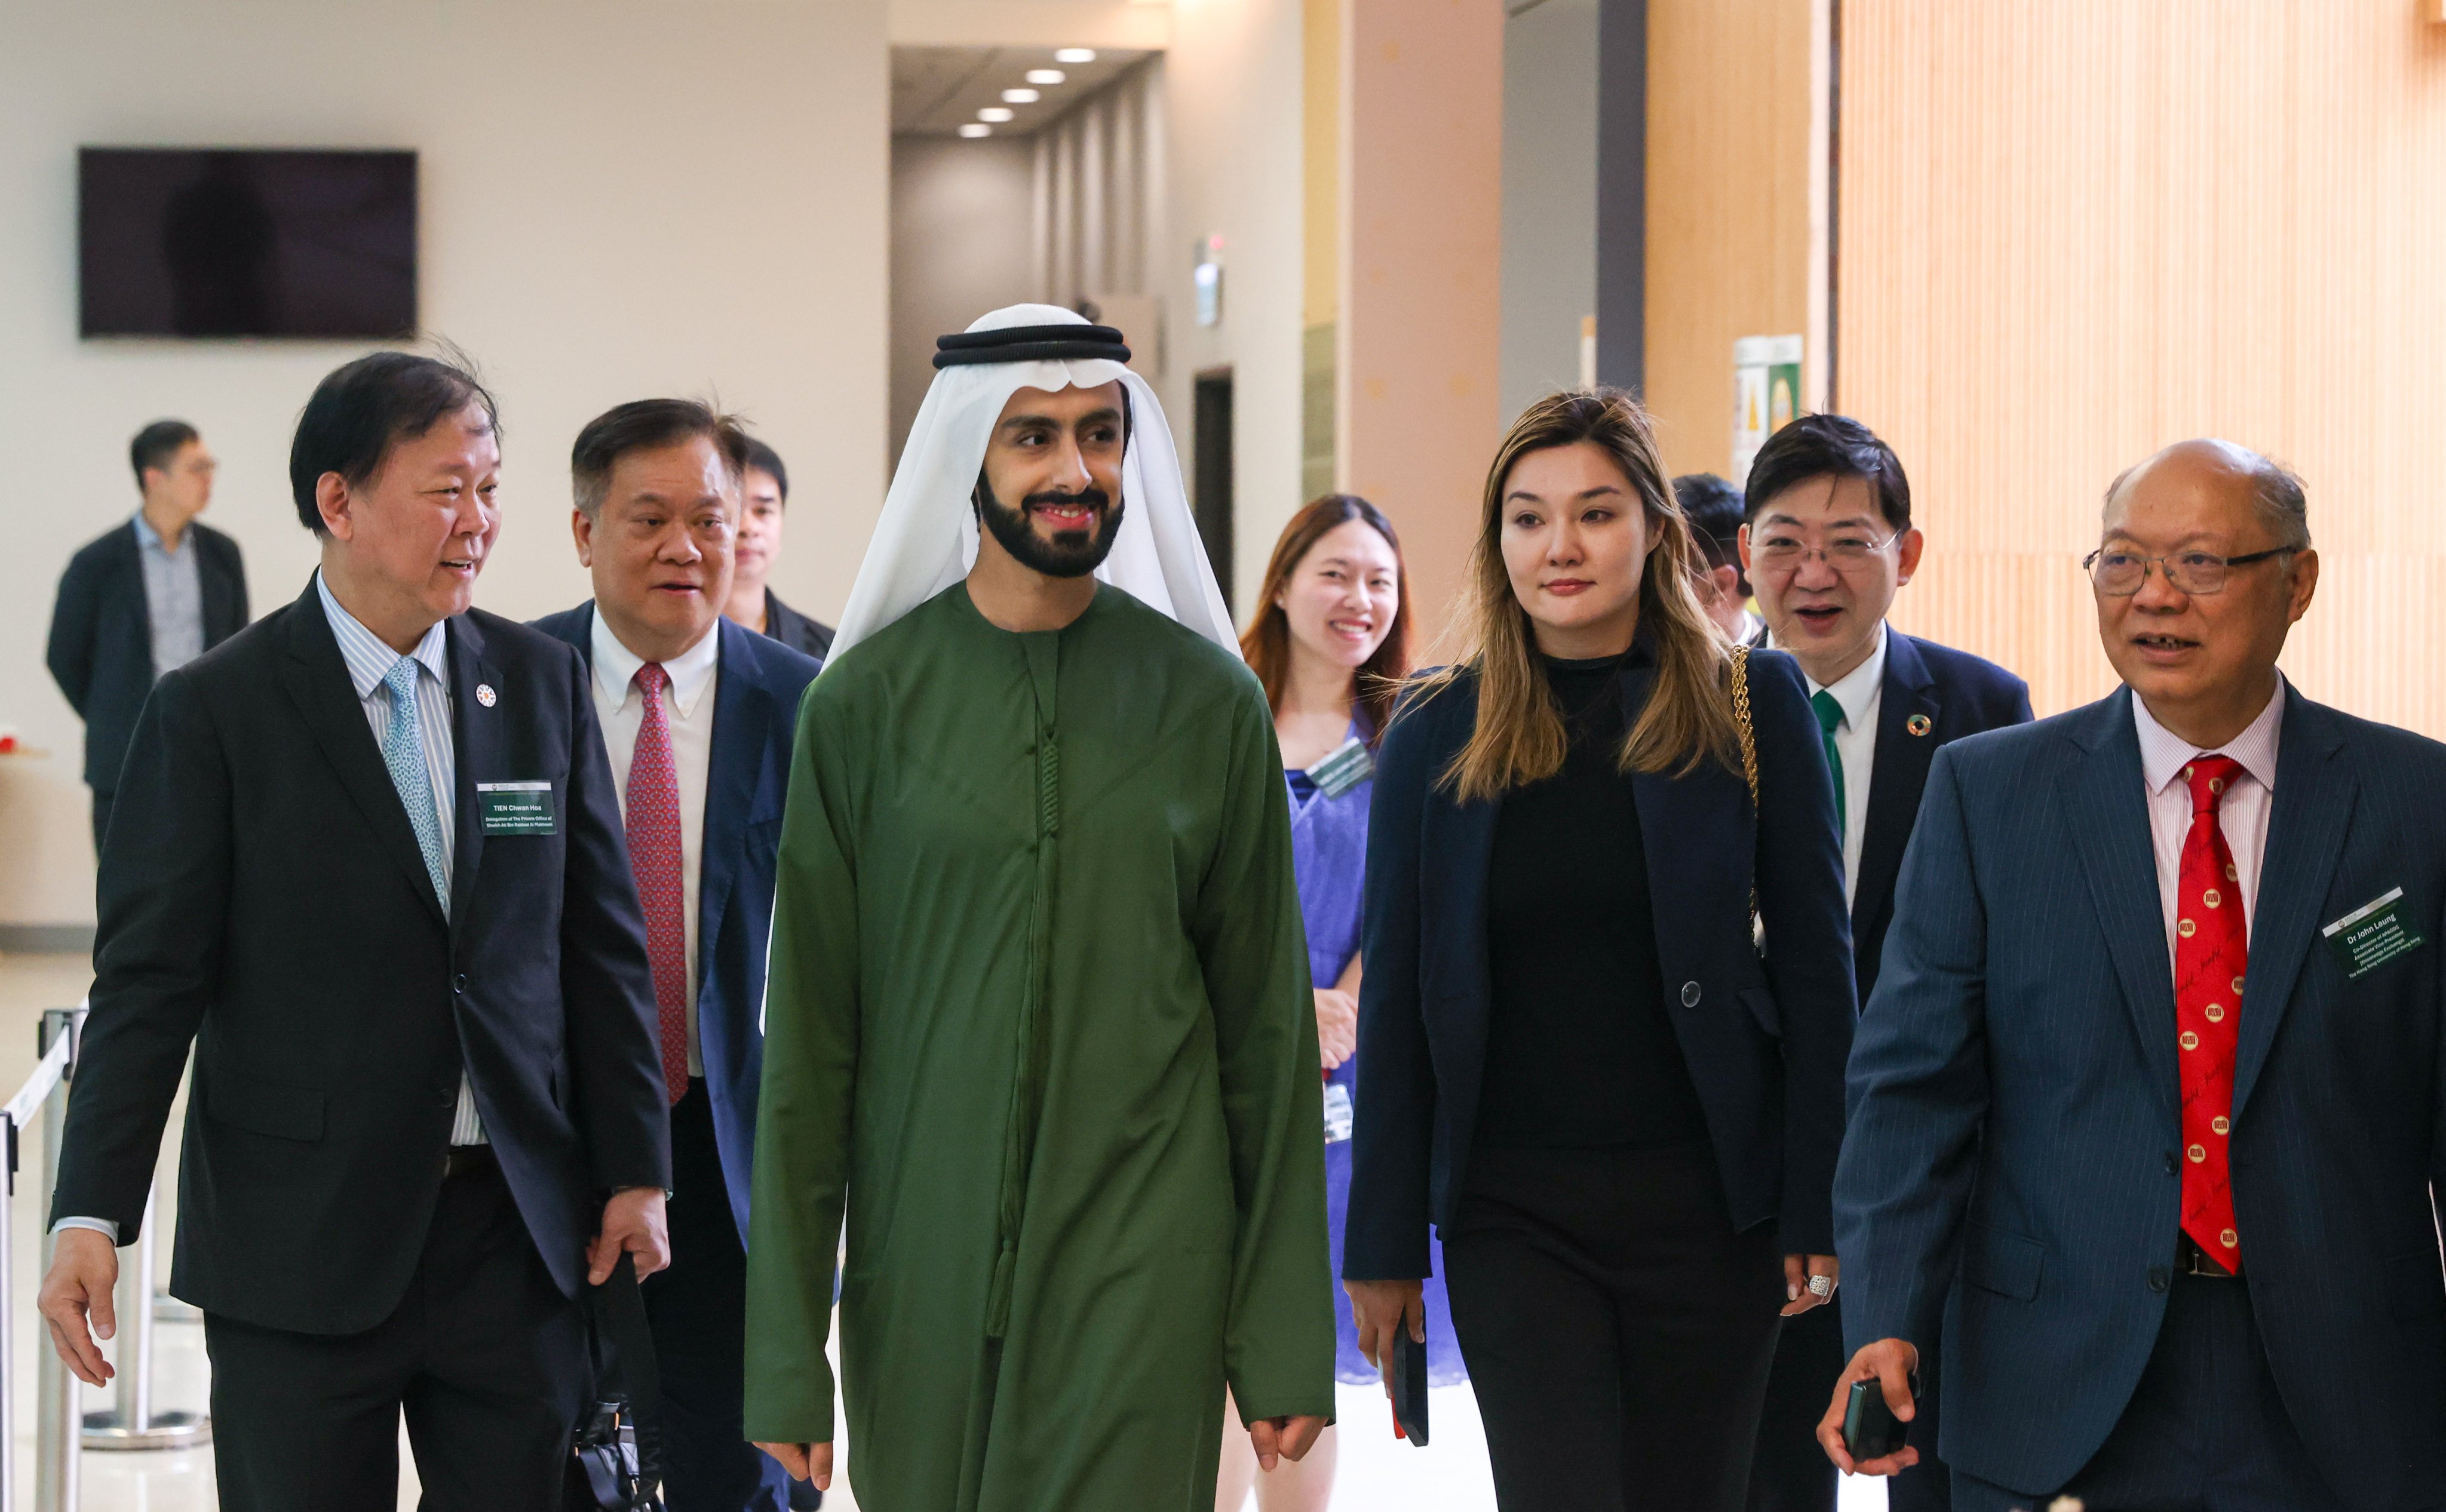 Sheikh Ali Al Maktoum (centre) has been thrust into the media spotlight after he pledged to open a US$500 million family office in Hong Kong and gave several high-profile appearances. Photo: Yik Yeung-man